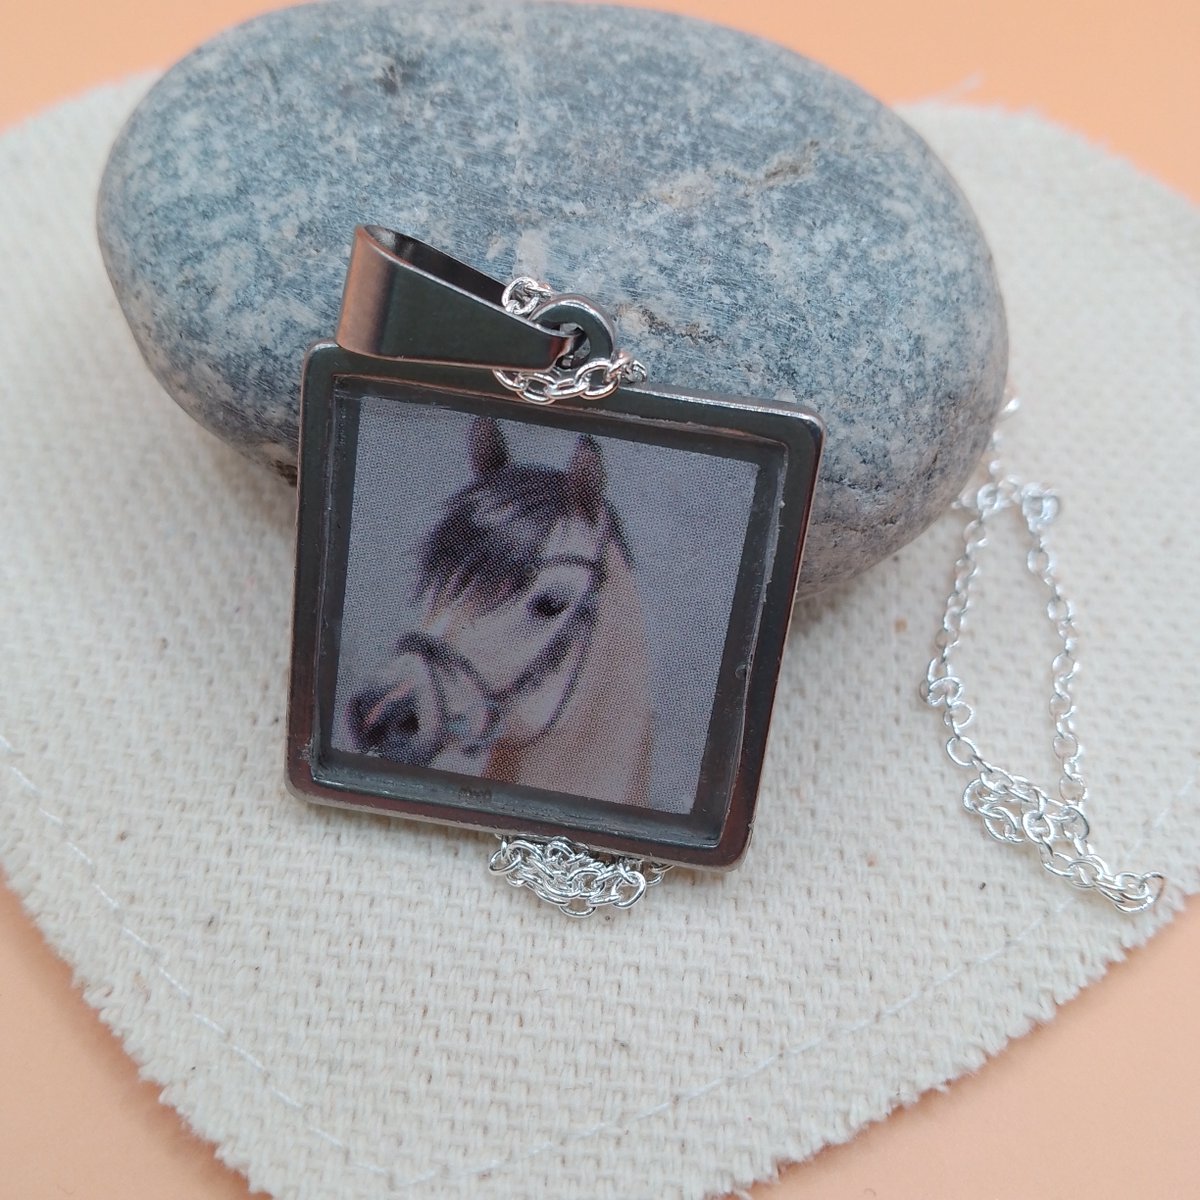 Beautiful necklace just right for a gift. Two available! - Horse portrait necklace besthandmade.co.uk/product/horse-… #mhhsbd #ukmakers #craftbizparty #elevenseshour #ponyhour #ukbizlunch